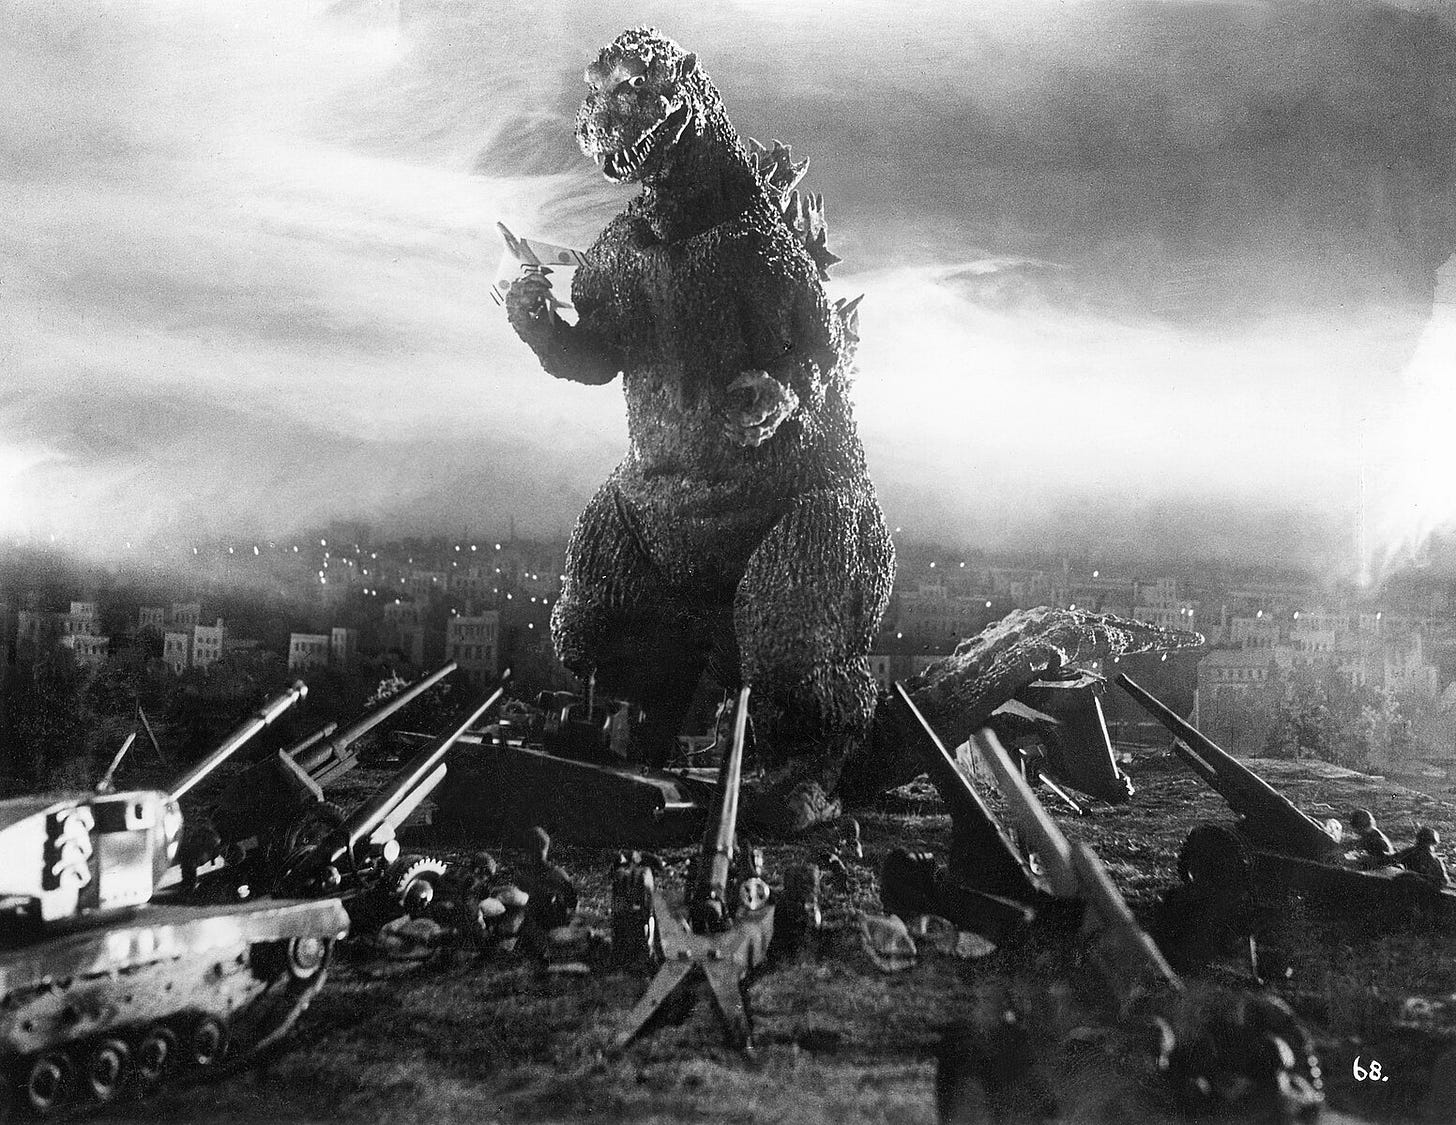 Picture of Godzilla from the original 1954 movie